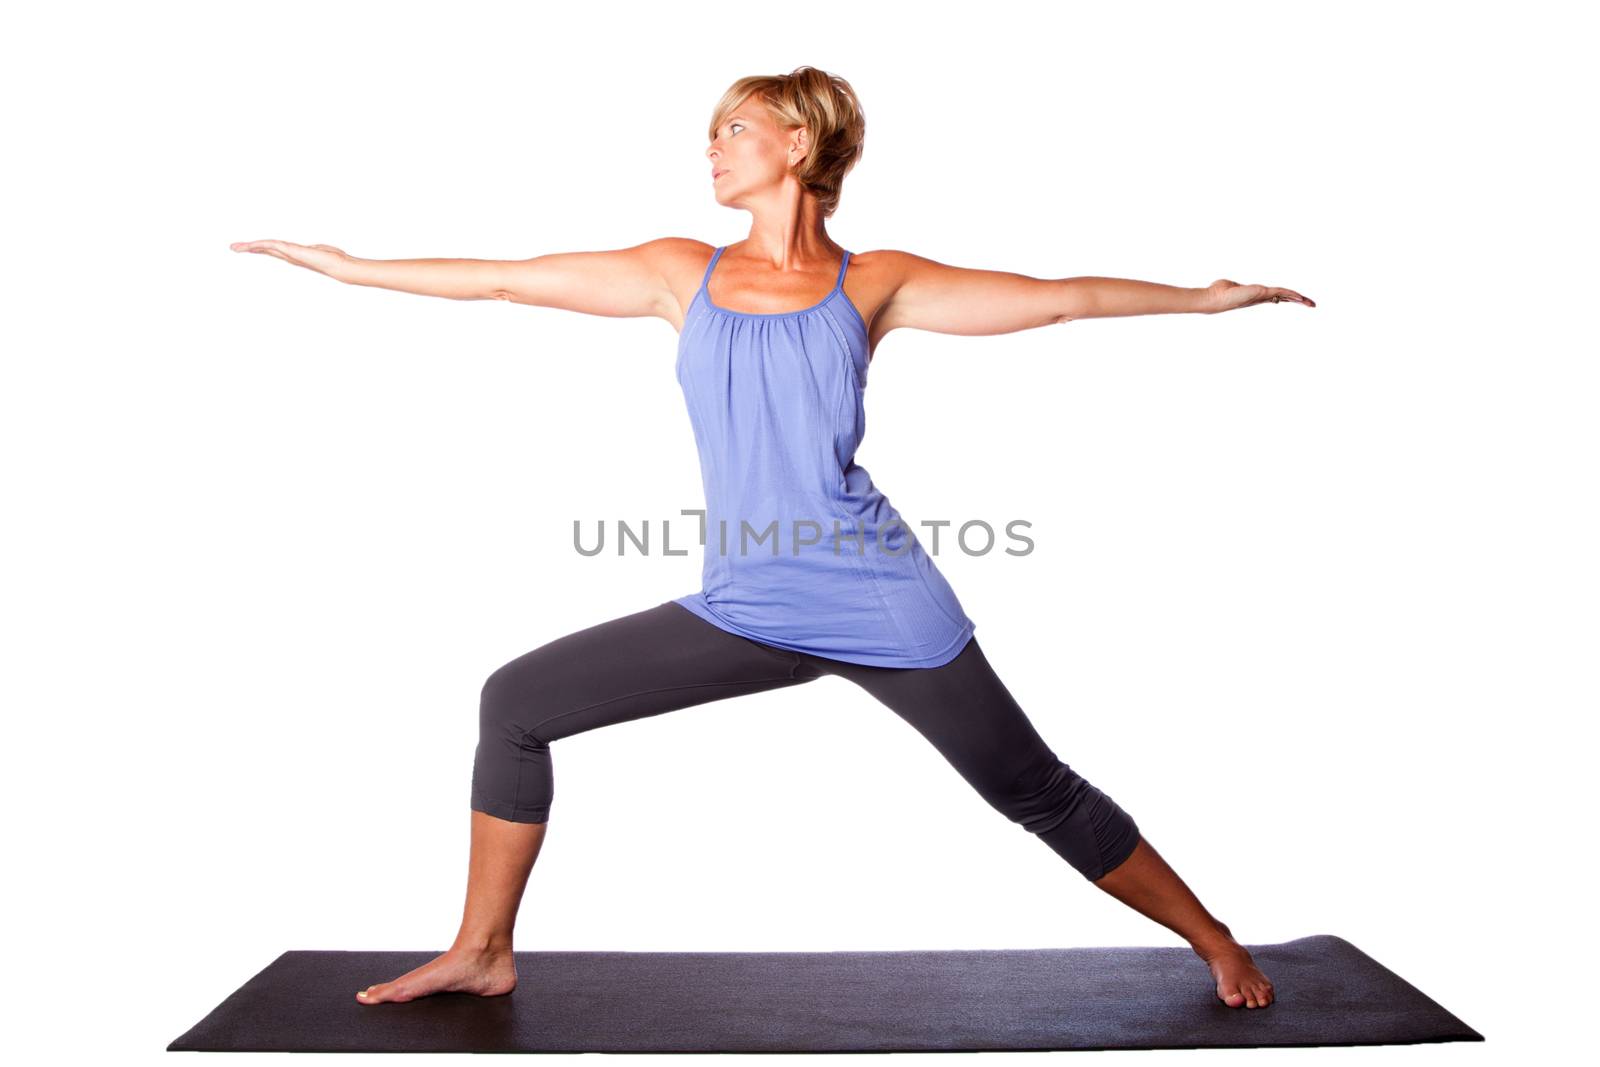 Warrior Two Virabhadrasana yoga pose extending arms by beautiful healthy woman, on white.